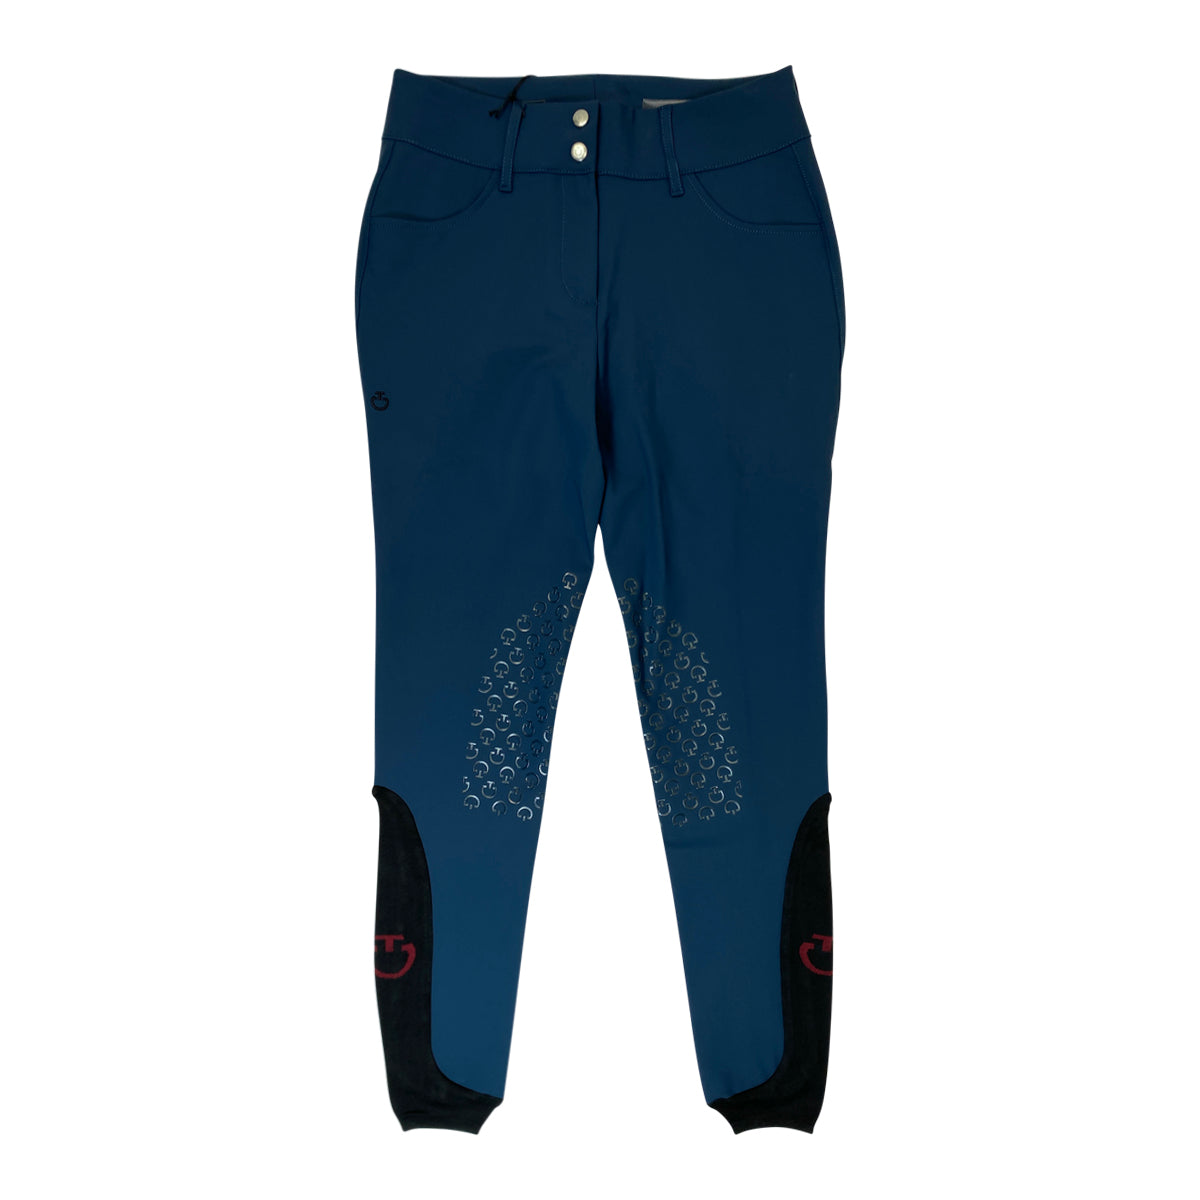 Cavalleria Toscana 'American' High Rise Jumping Breeches in Navy